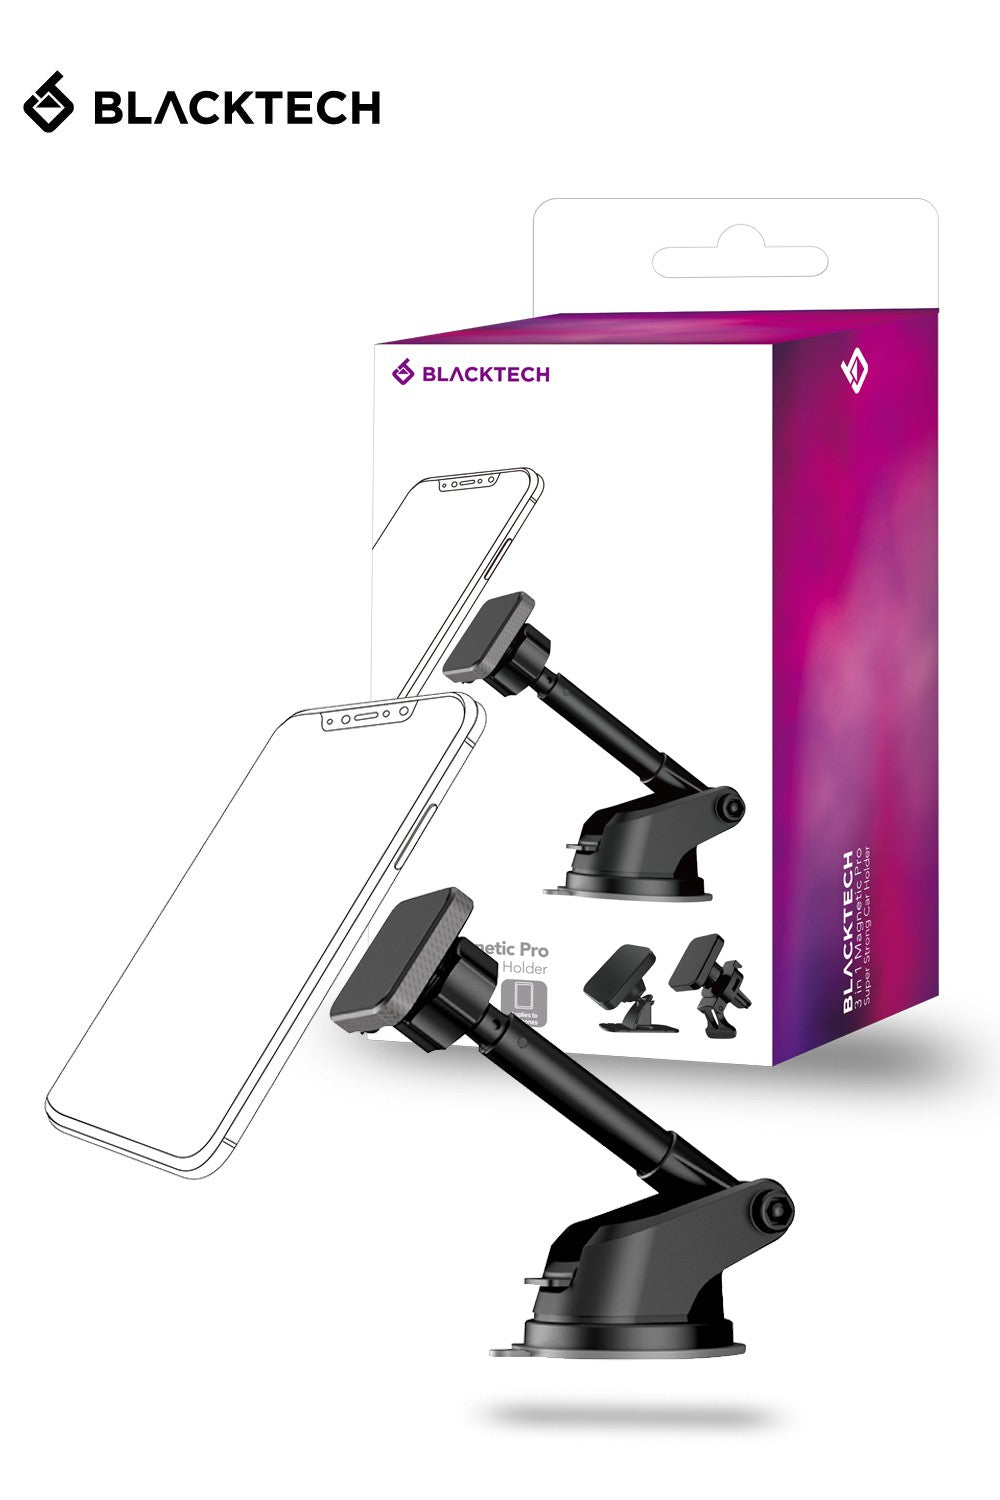 BLACKTECH Super Strong Magnetic Pro 3 in 1 Holder